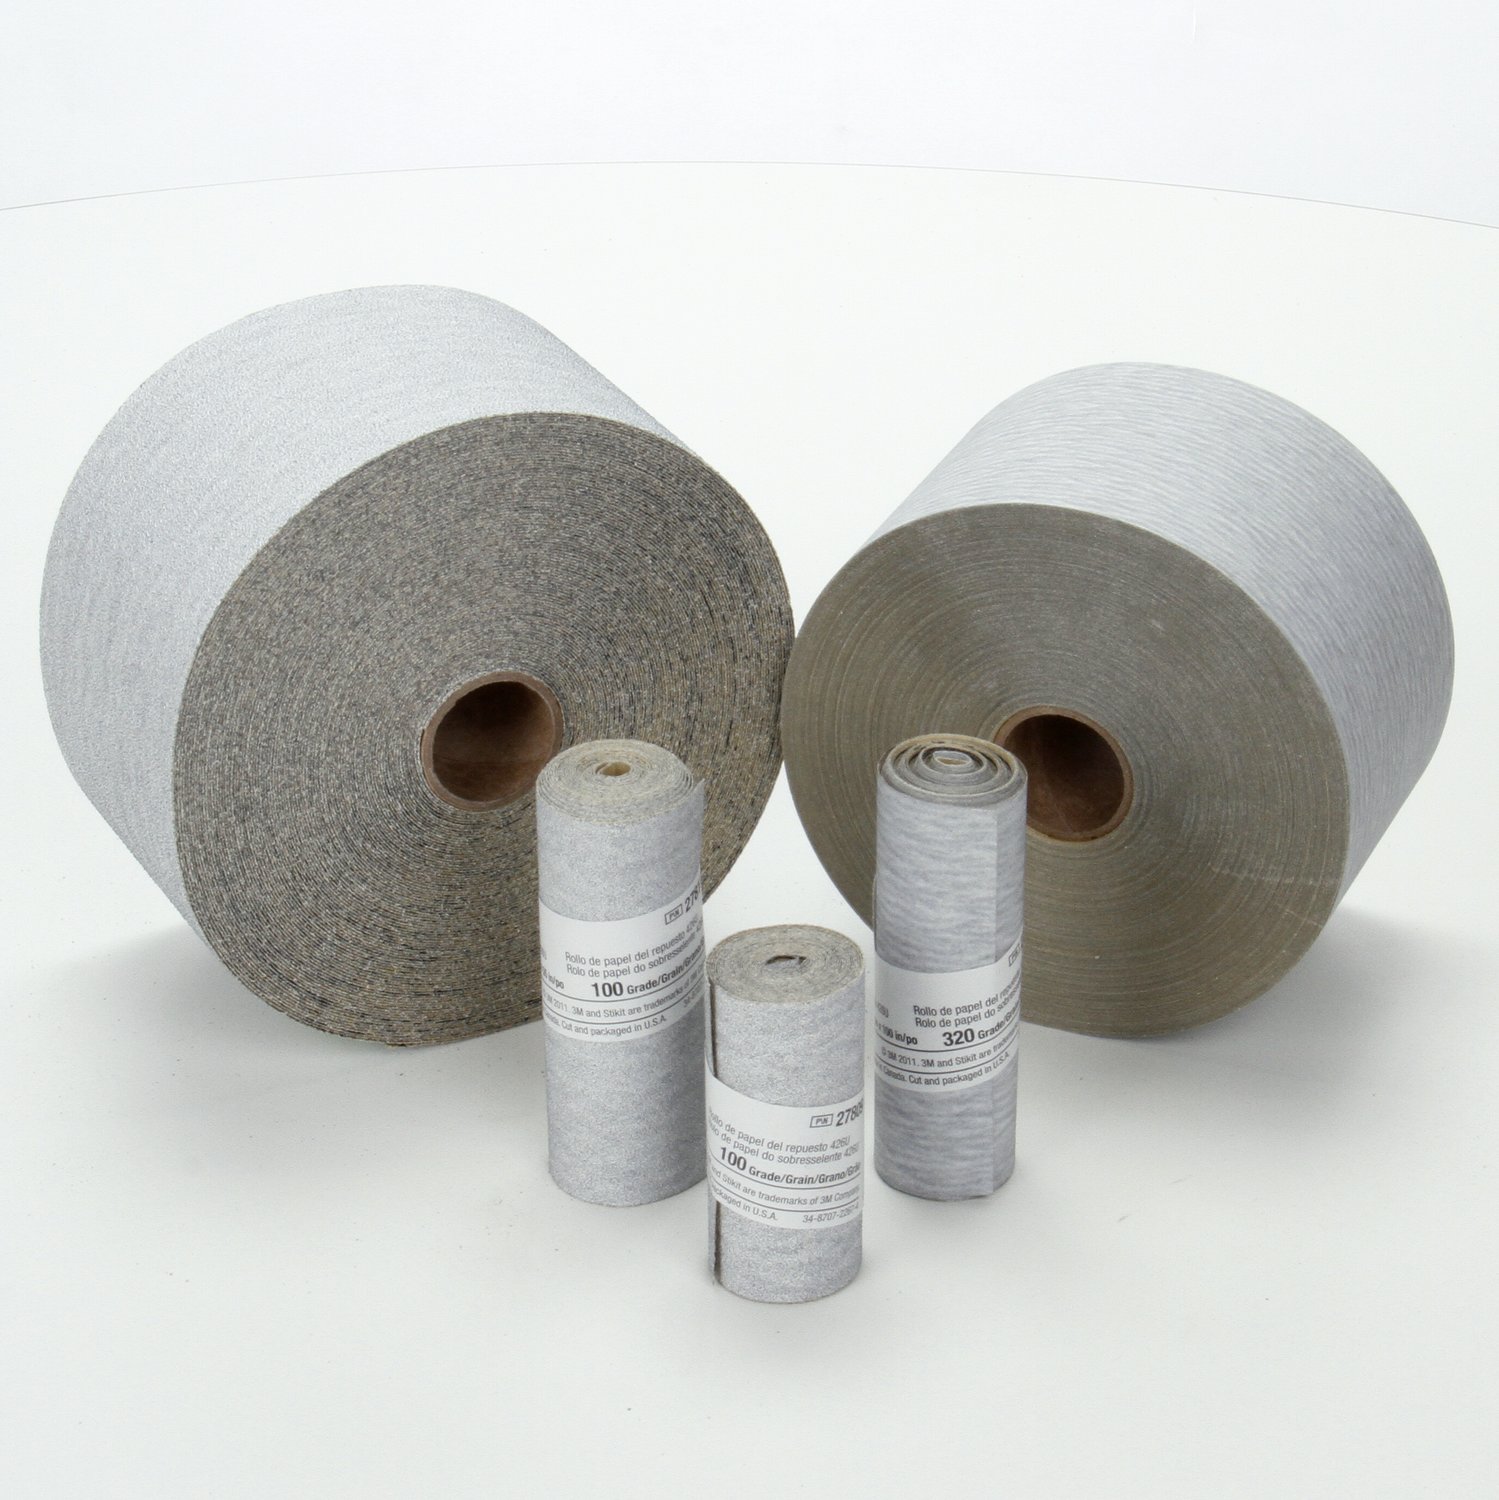 7100070164 - 3M Stikit Paper Roll 426U, 180 A-weight, Config